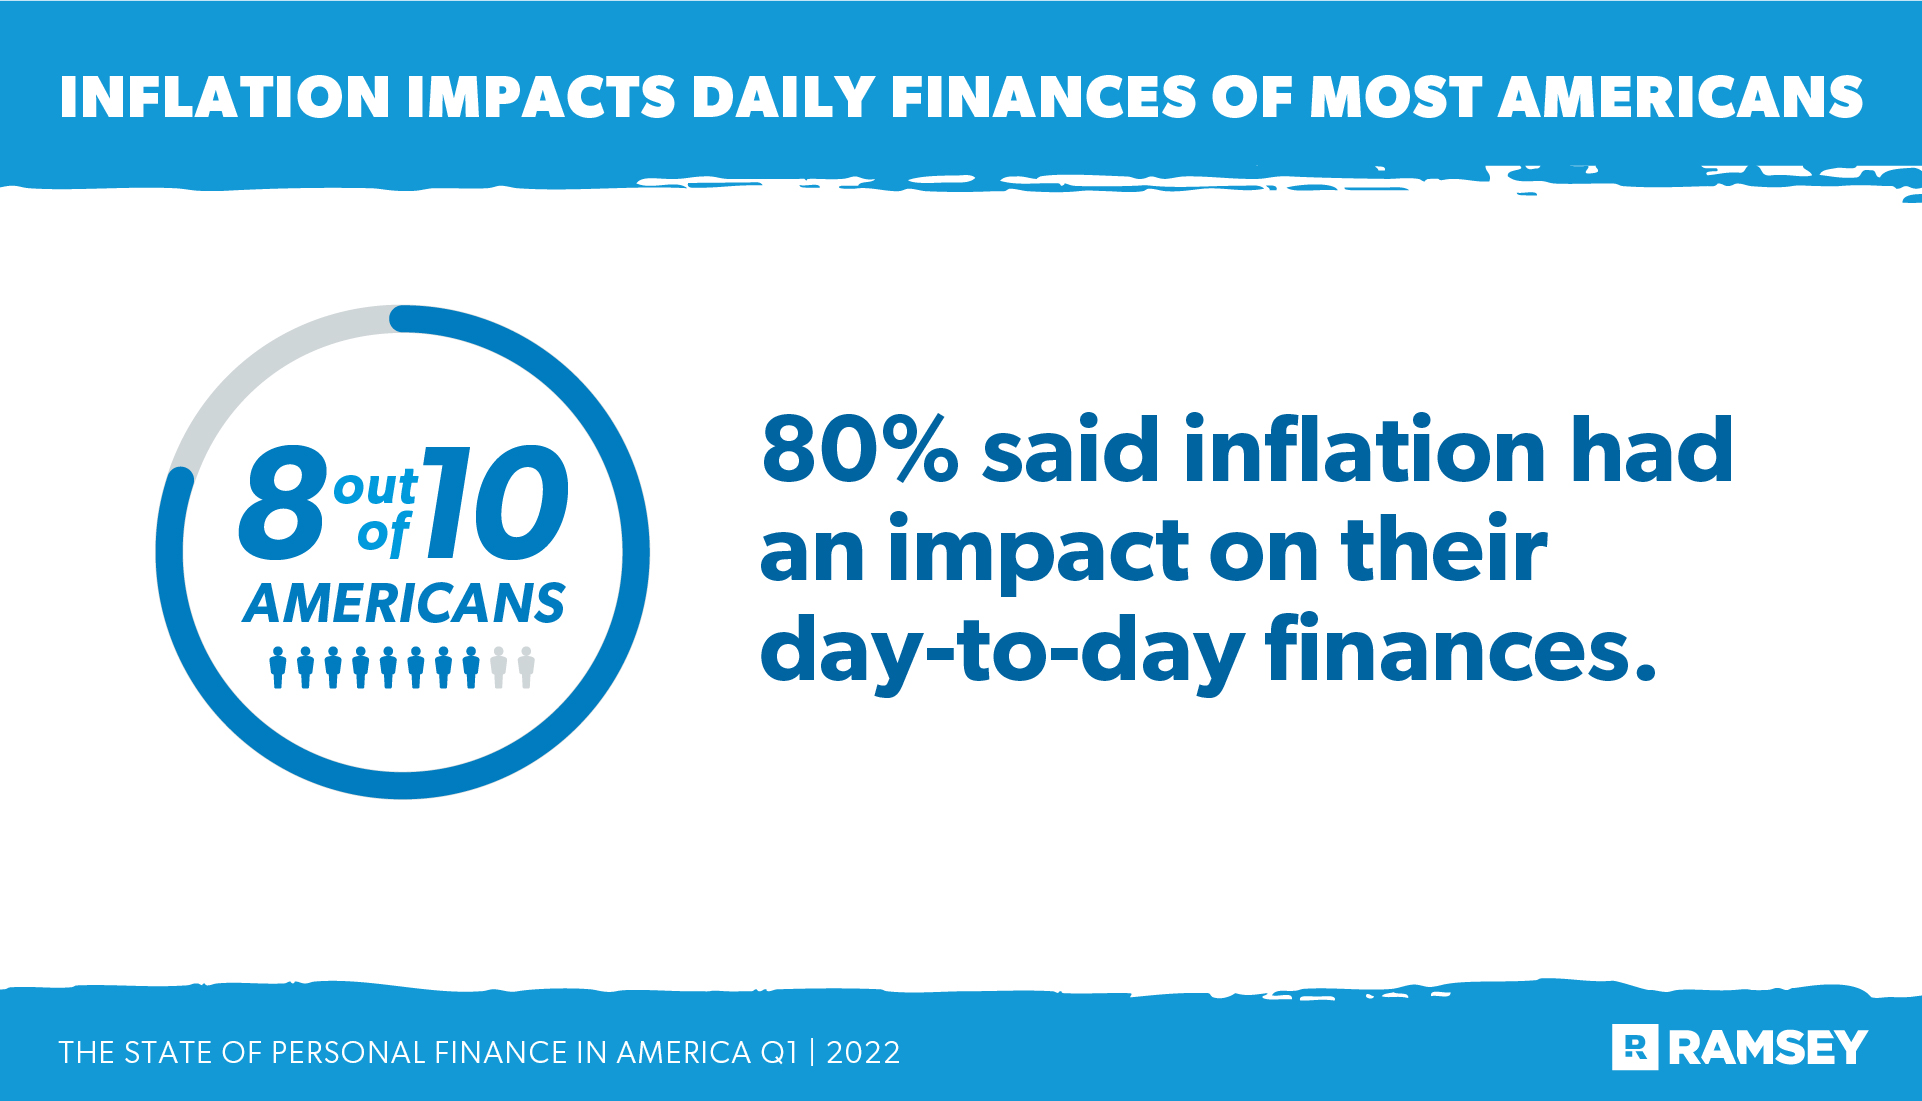 inflation impacts daily finances of most Americans